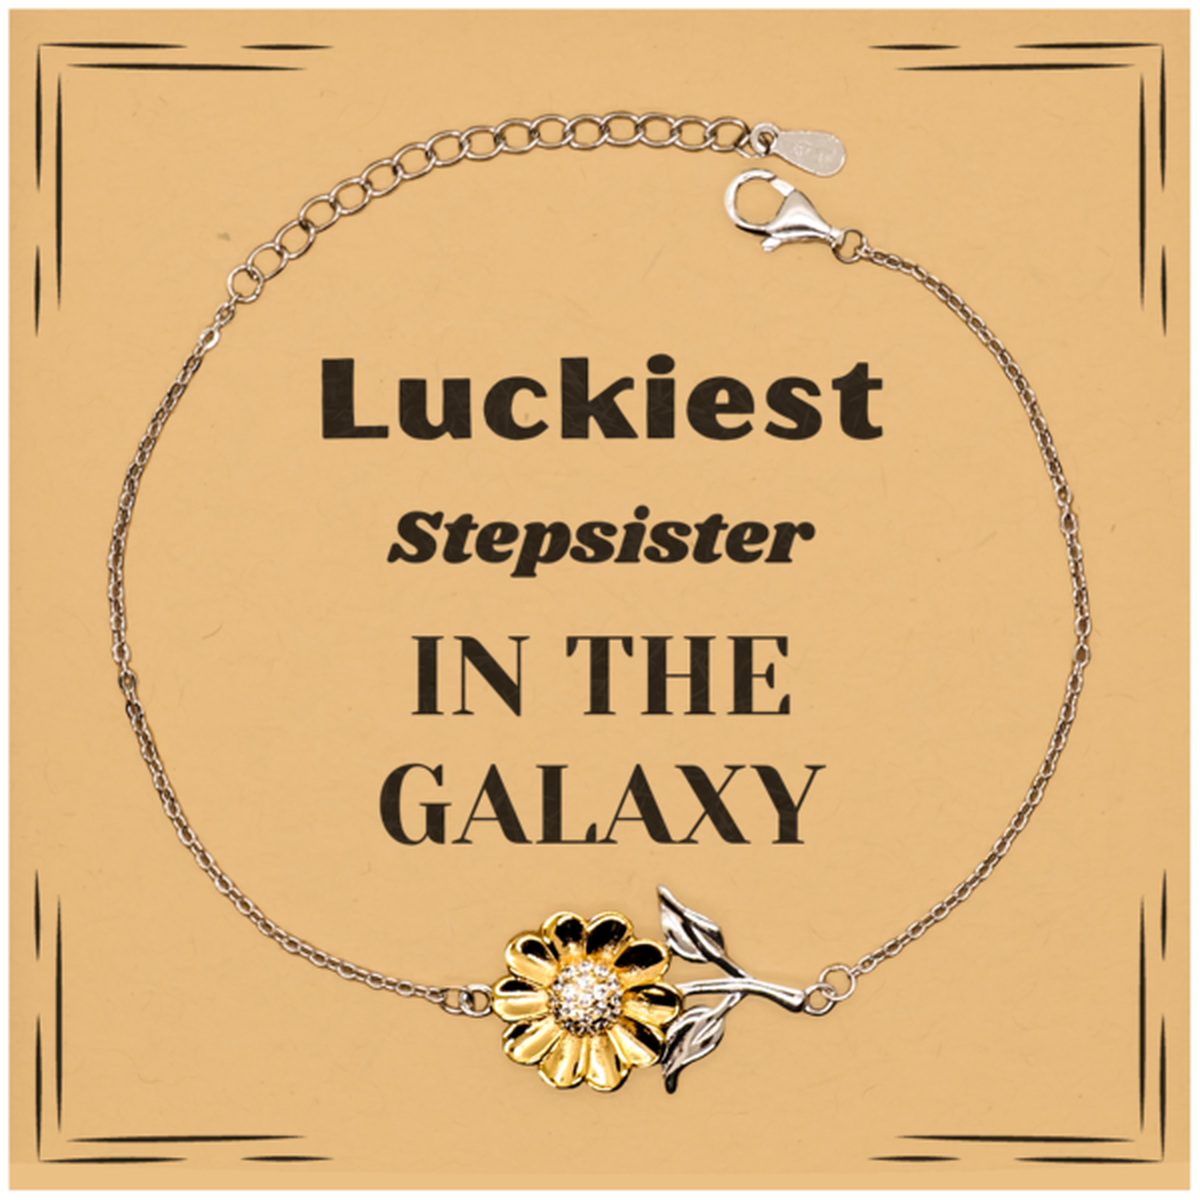 Luckiest Stepsister in the Galaxy, To My Stepsister Message Card Gifts, Christmas Stepsister Sunflower Bracelet Gifts, X-mas Birthday Unique Gifts For Stepsister Men Women